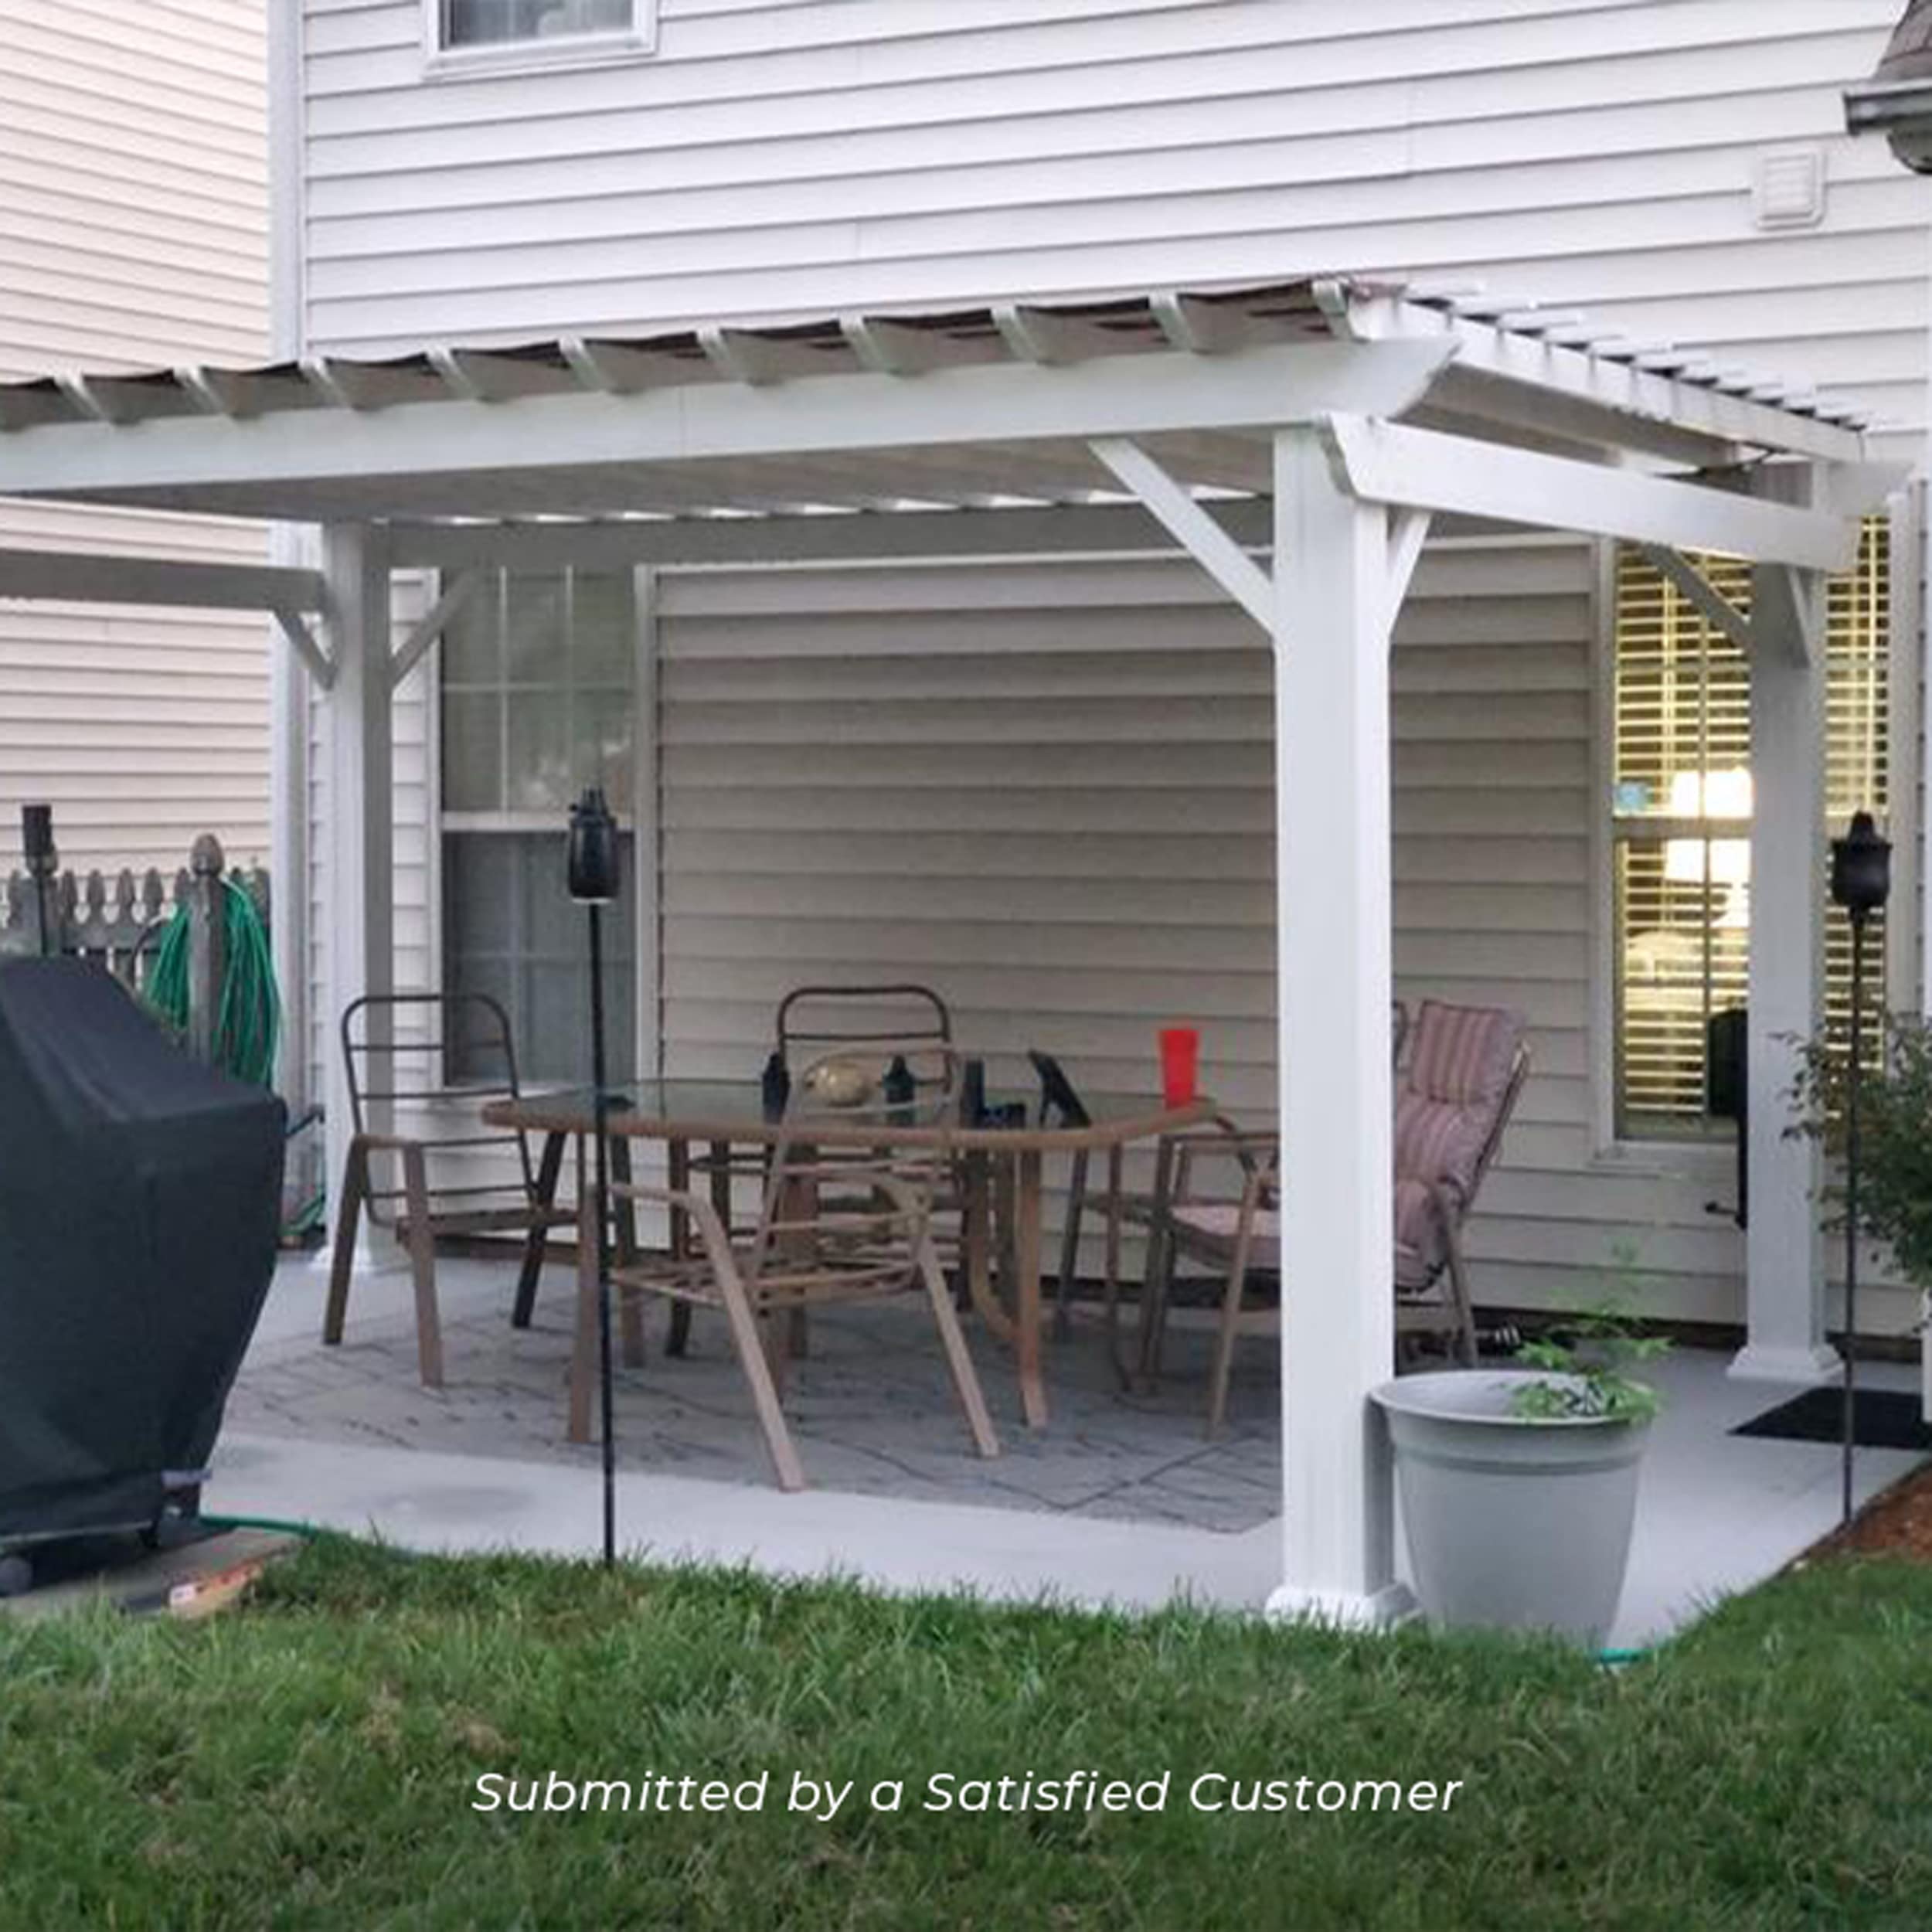 Backyard Discovery 16x12 ft Hawthorne White Galvanized Steel Pergola w/Soft Sail Shade, Spacious, Rust Resistant, UV Protection, Resist Winds Up to 100 MPH, Durable, Powerport USB & Electrical Outlet